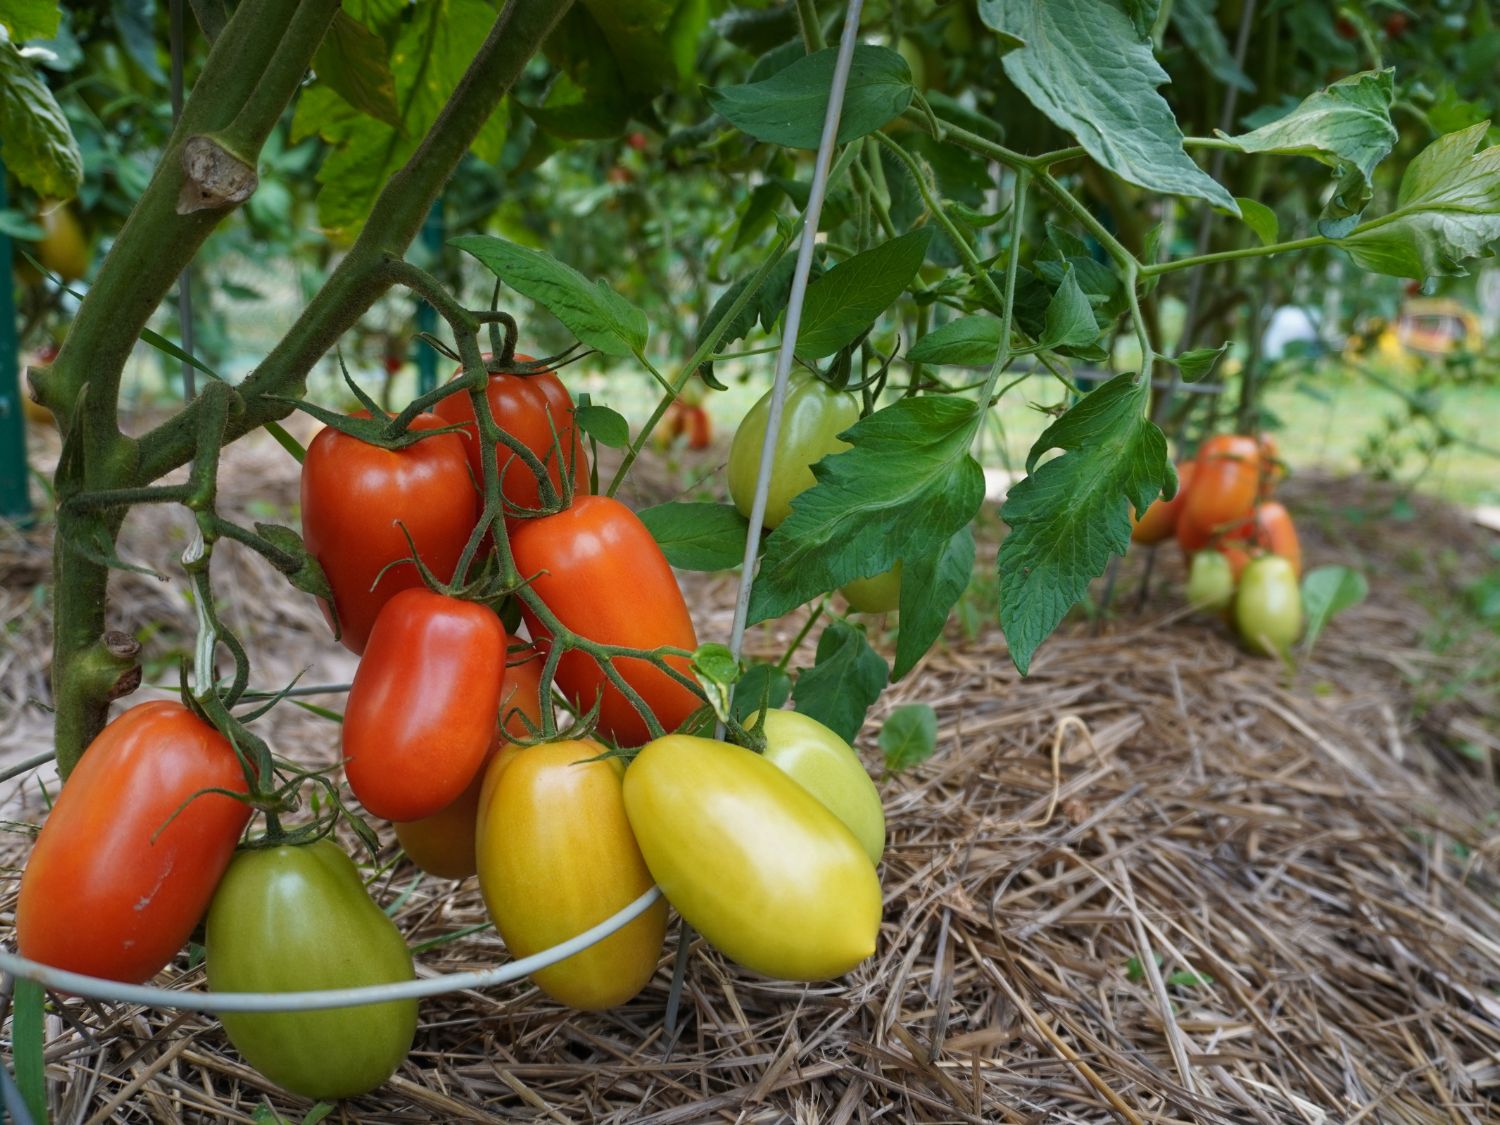 A photo of tomatoes ripening at different times on the plant